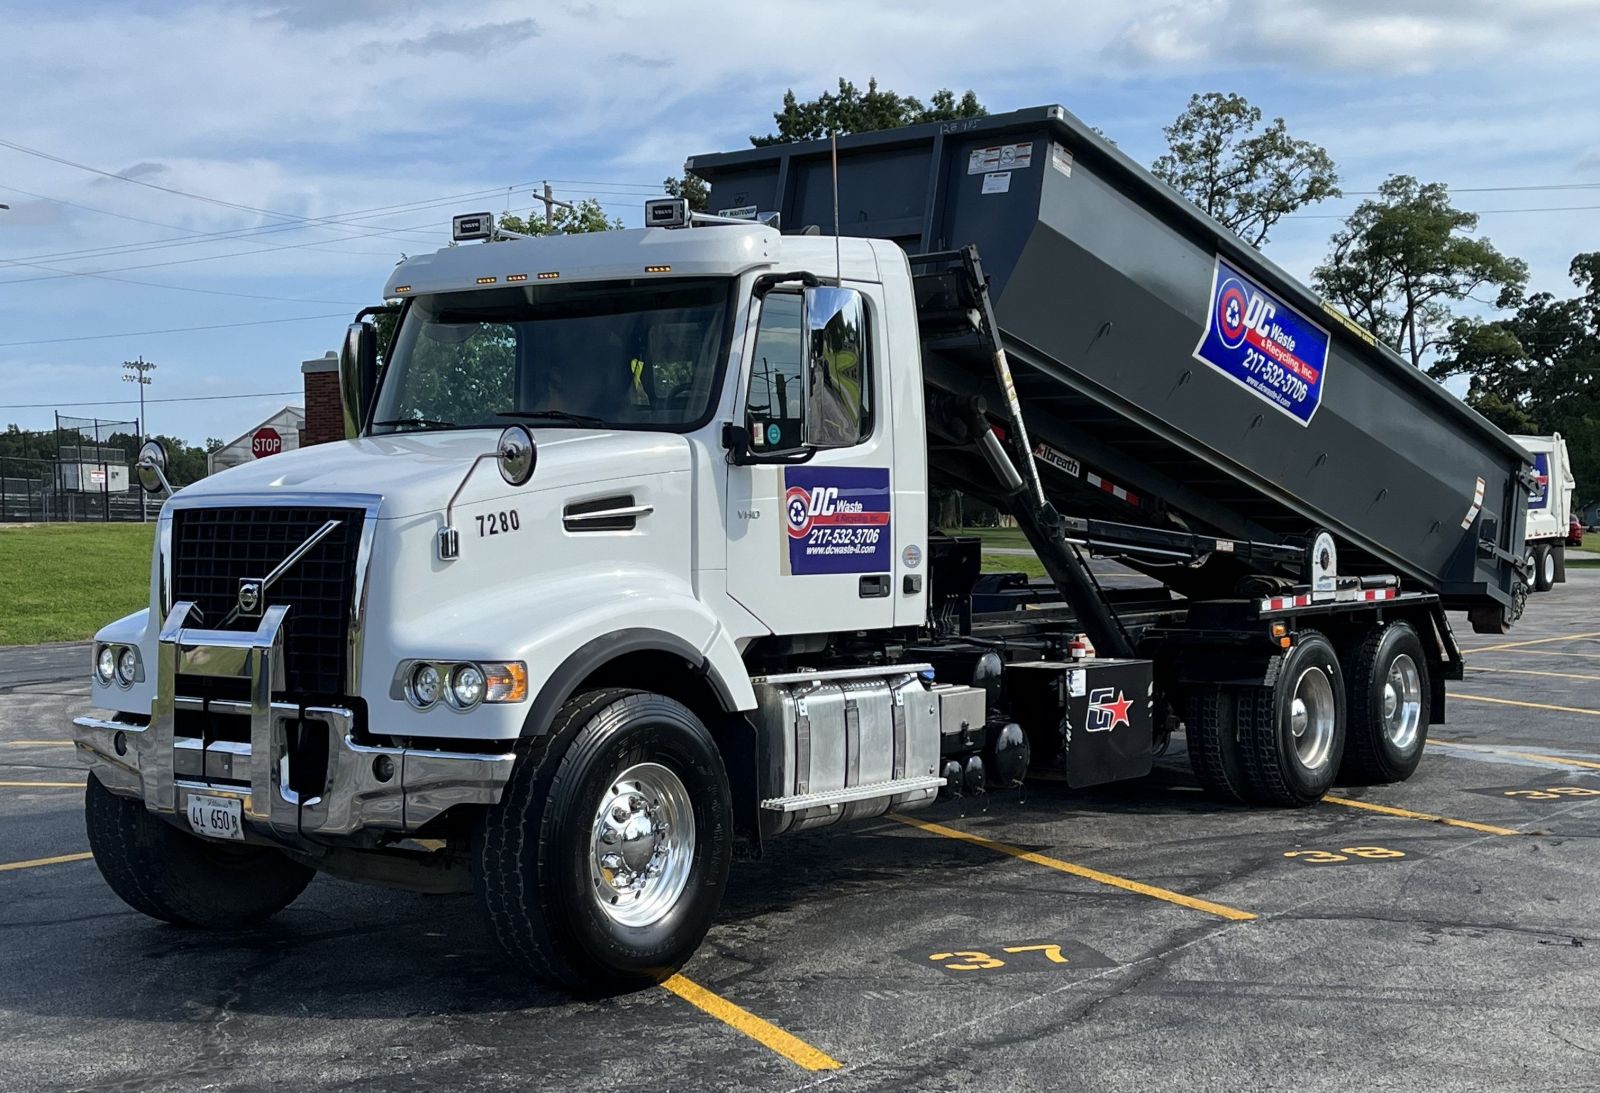 DC Waste offers waste management services